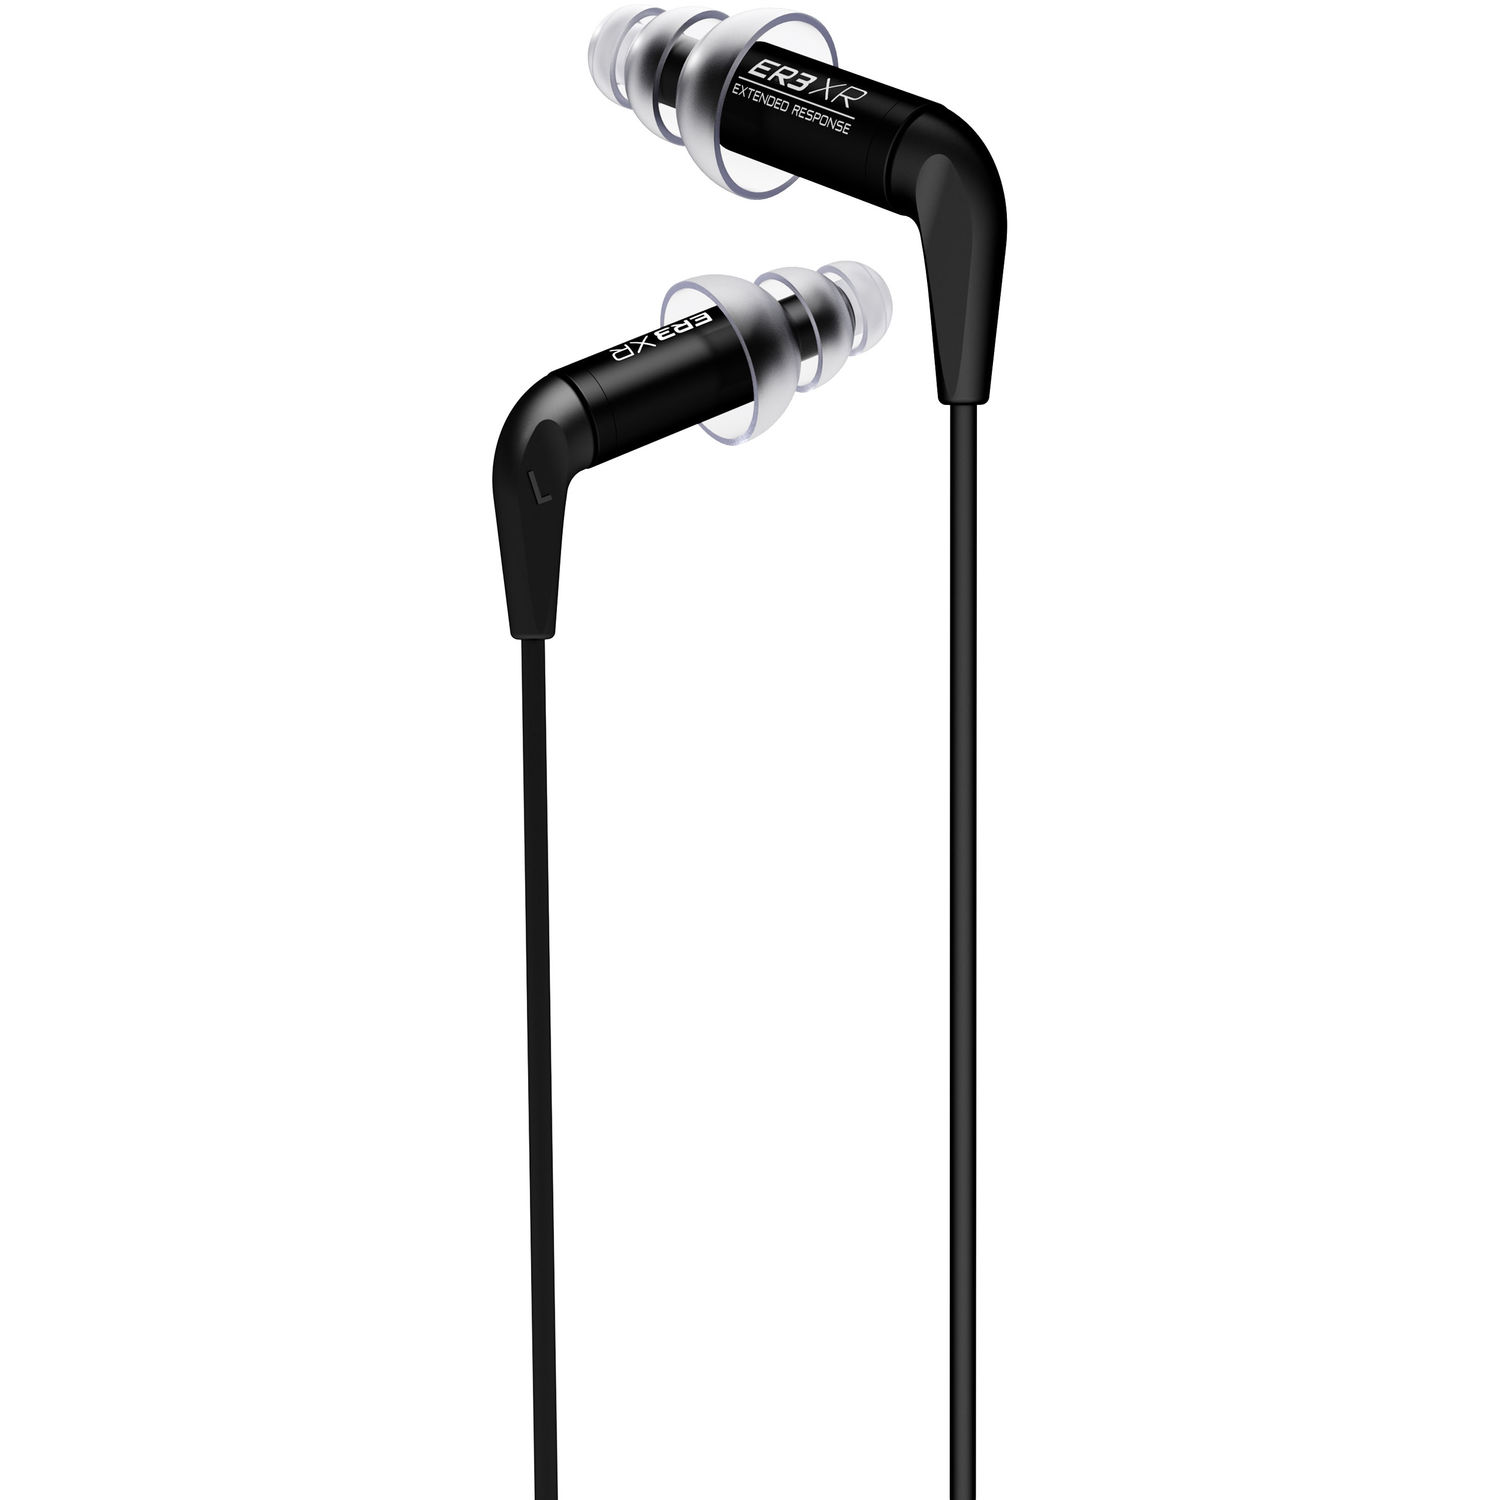 Auriculares Etymotic Research Er3Xr Le Extended Response con Adaptador Lightning